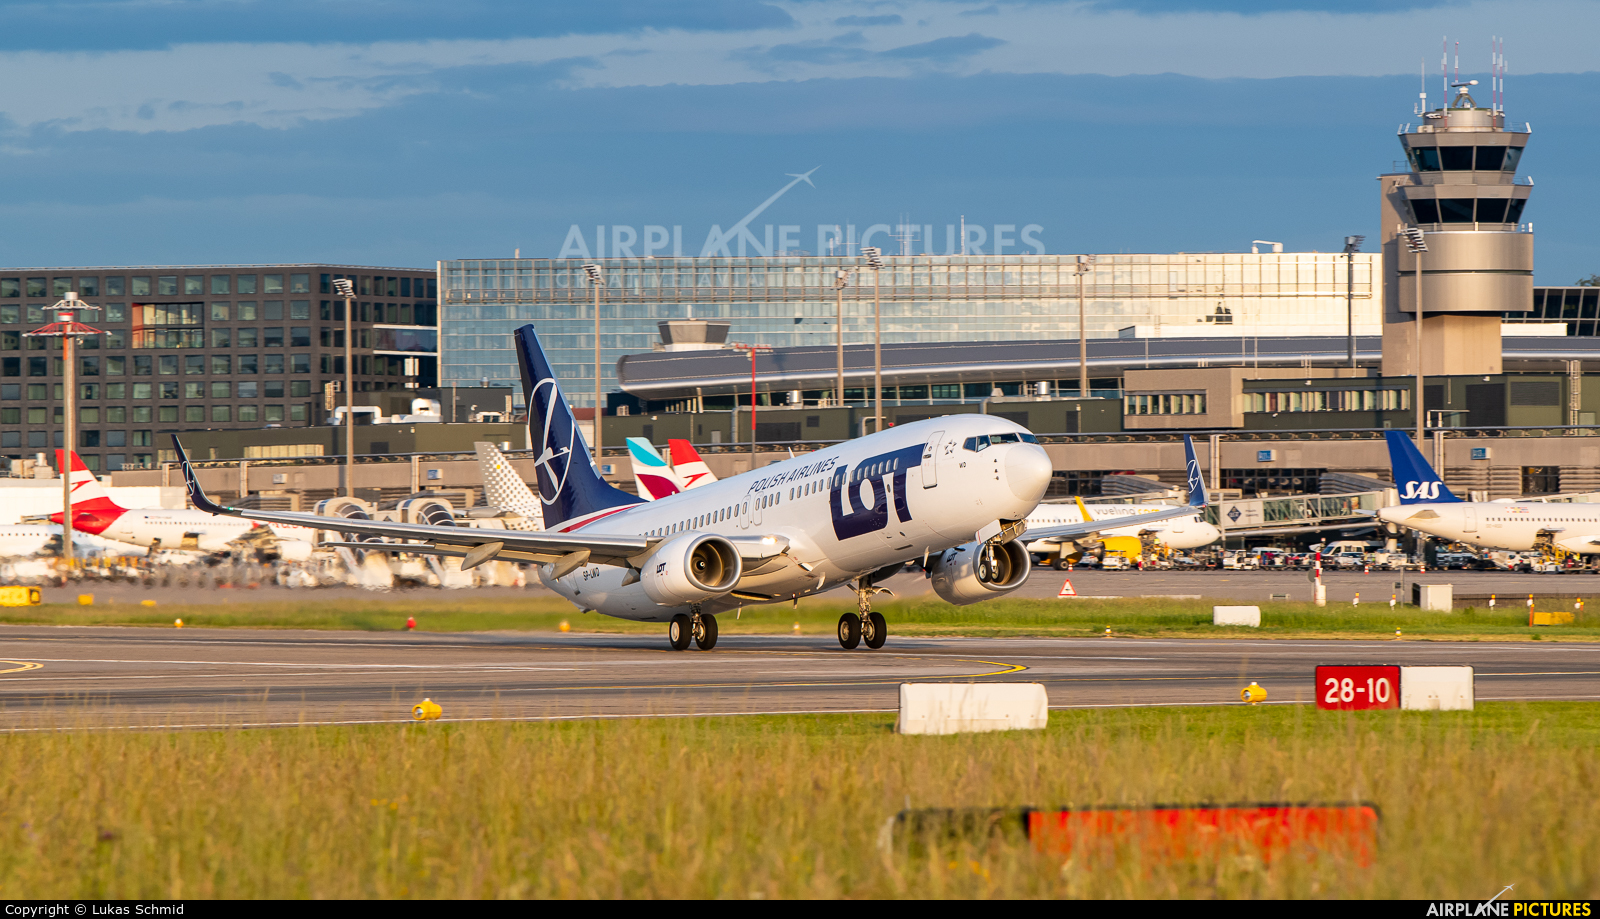 LOT - Polish Airlines SP-LWD aircraft at Zurich